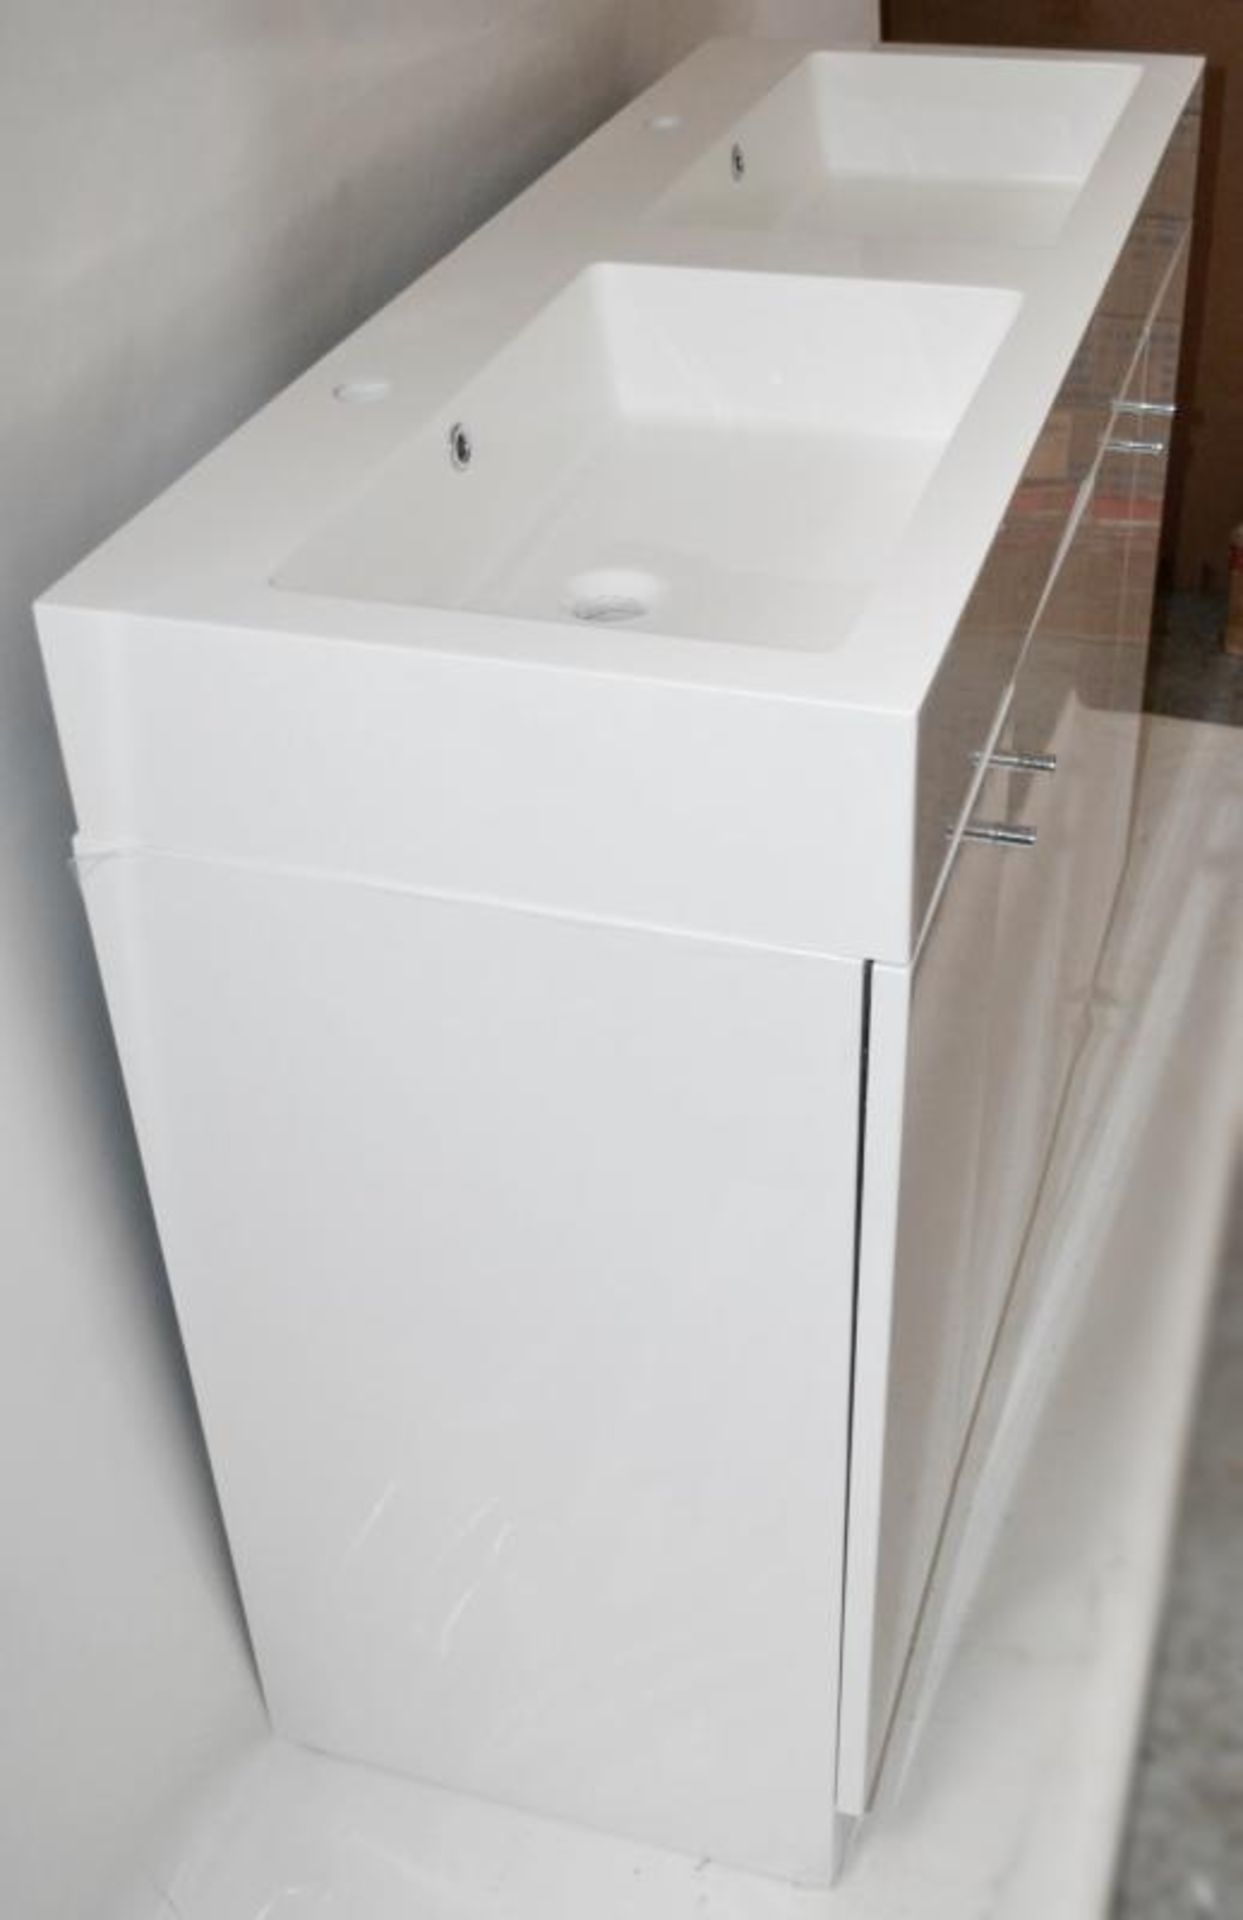 JOB LOT of 10 x Gloss White 1200mm 4-Door Double Basin Freestanding Bathroom Cabinet - New & Boxed - Image 3 of 7